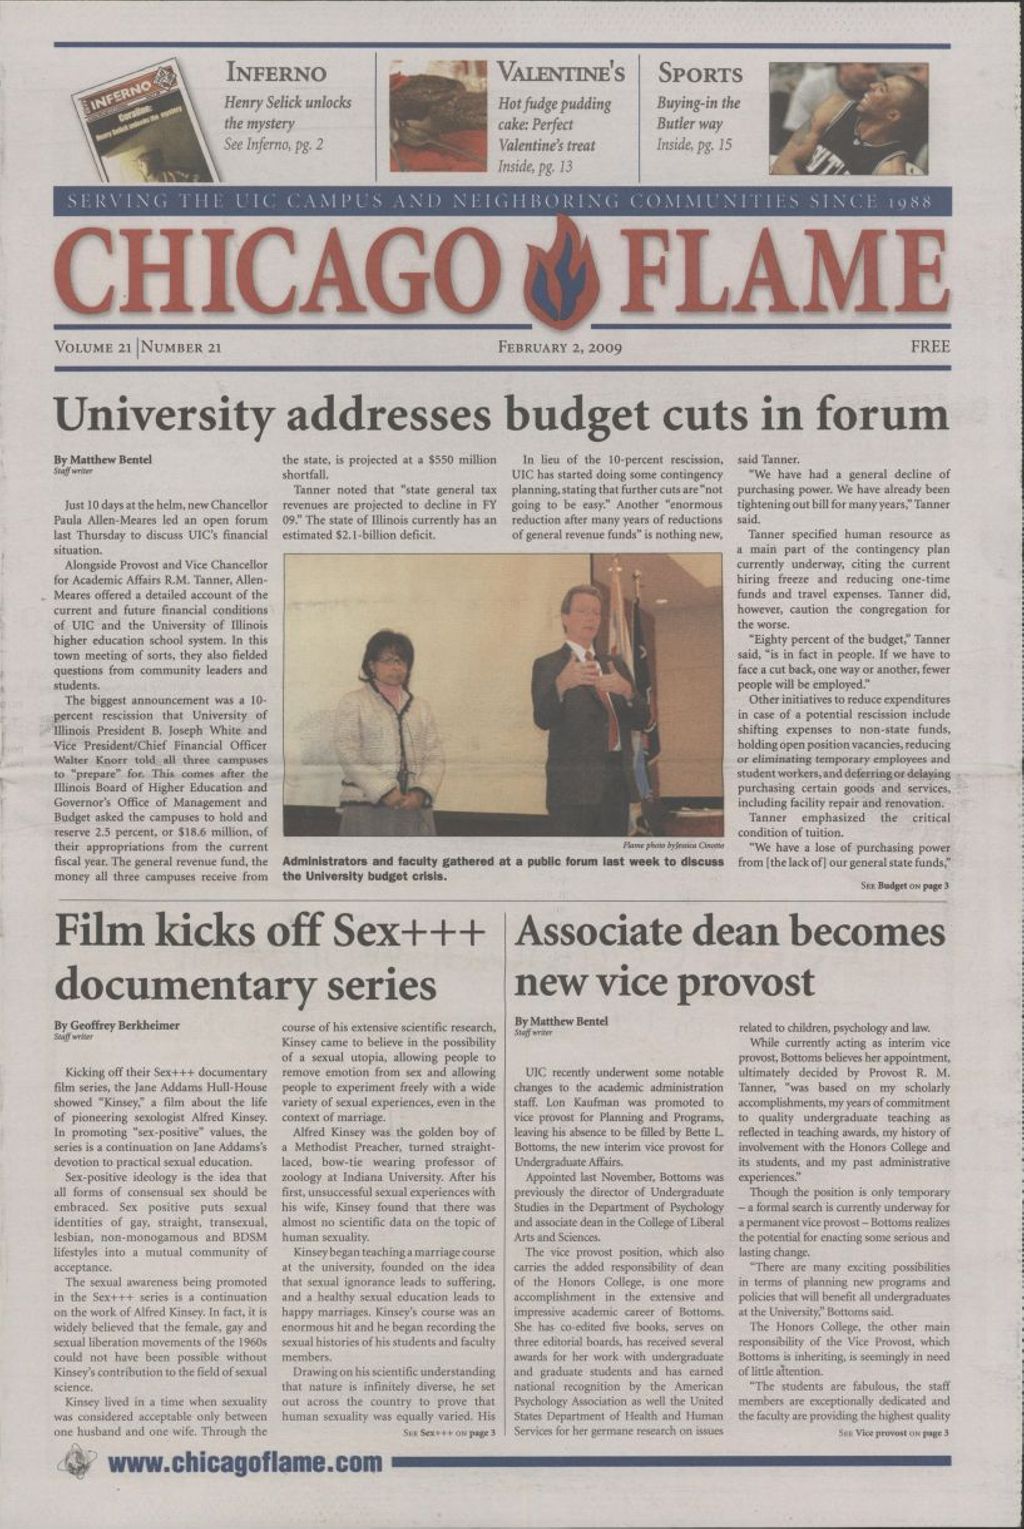 Chicago Flame (February 2, 2009)